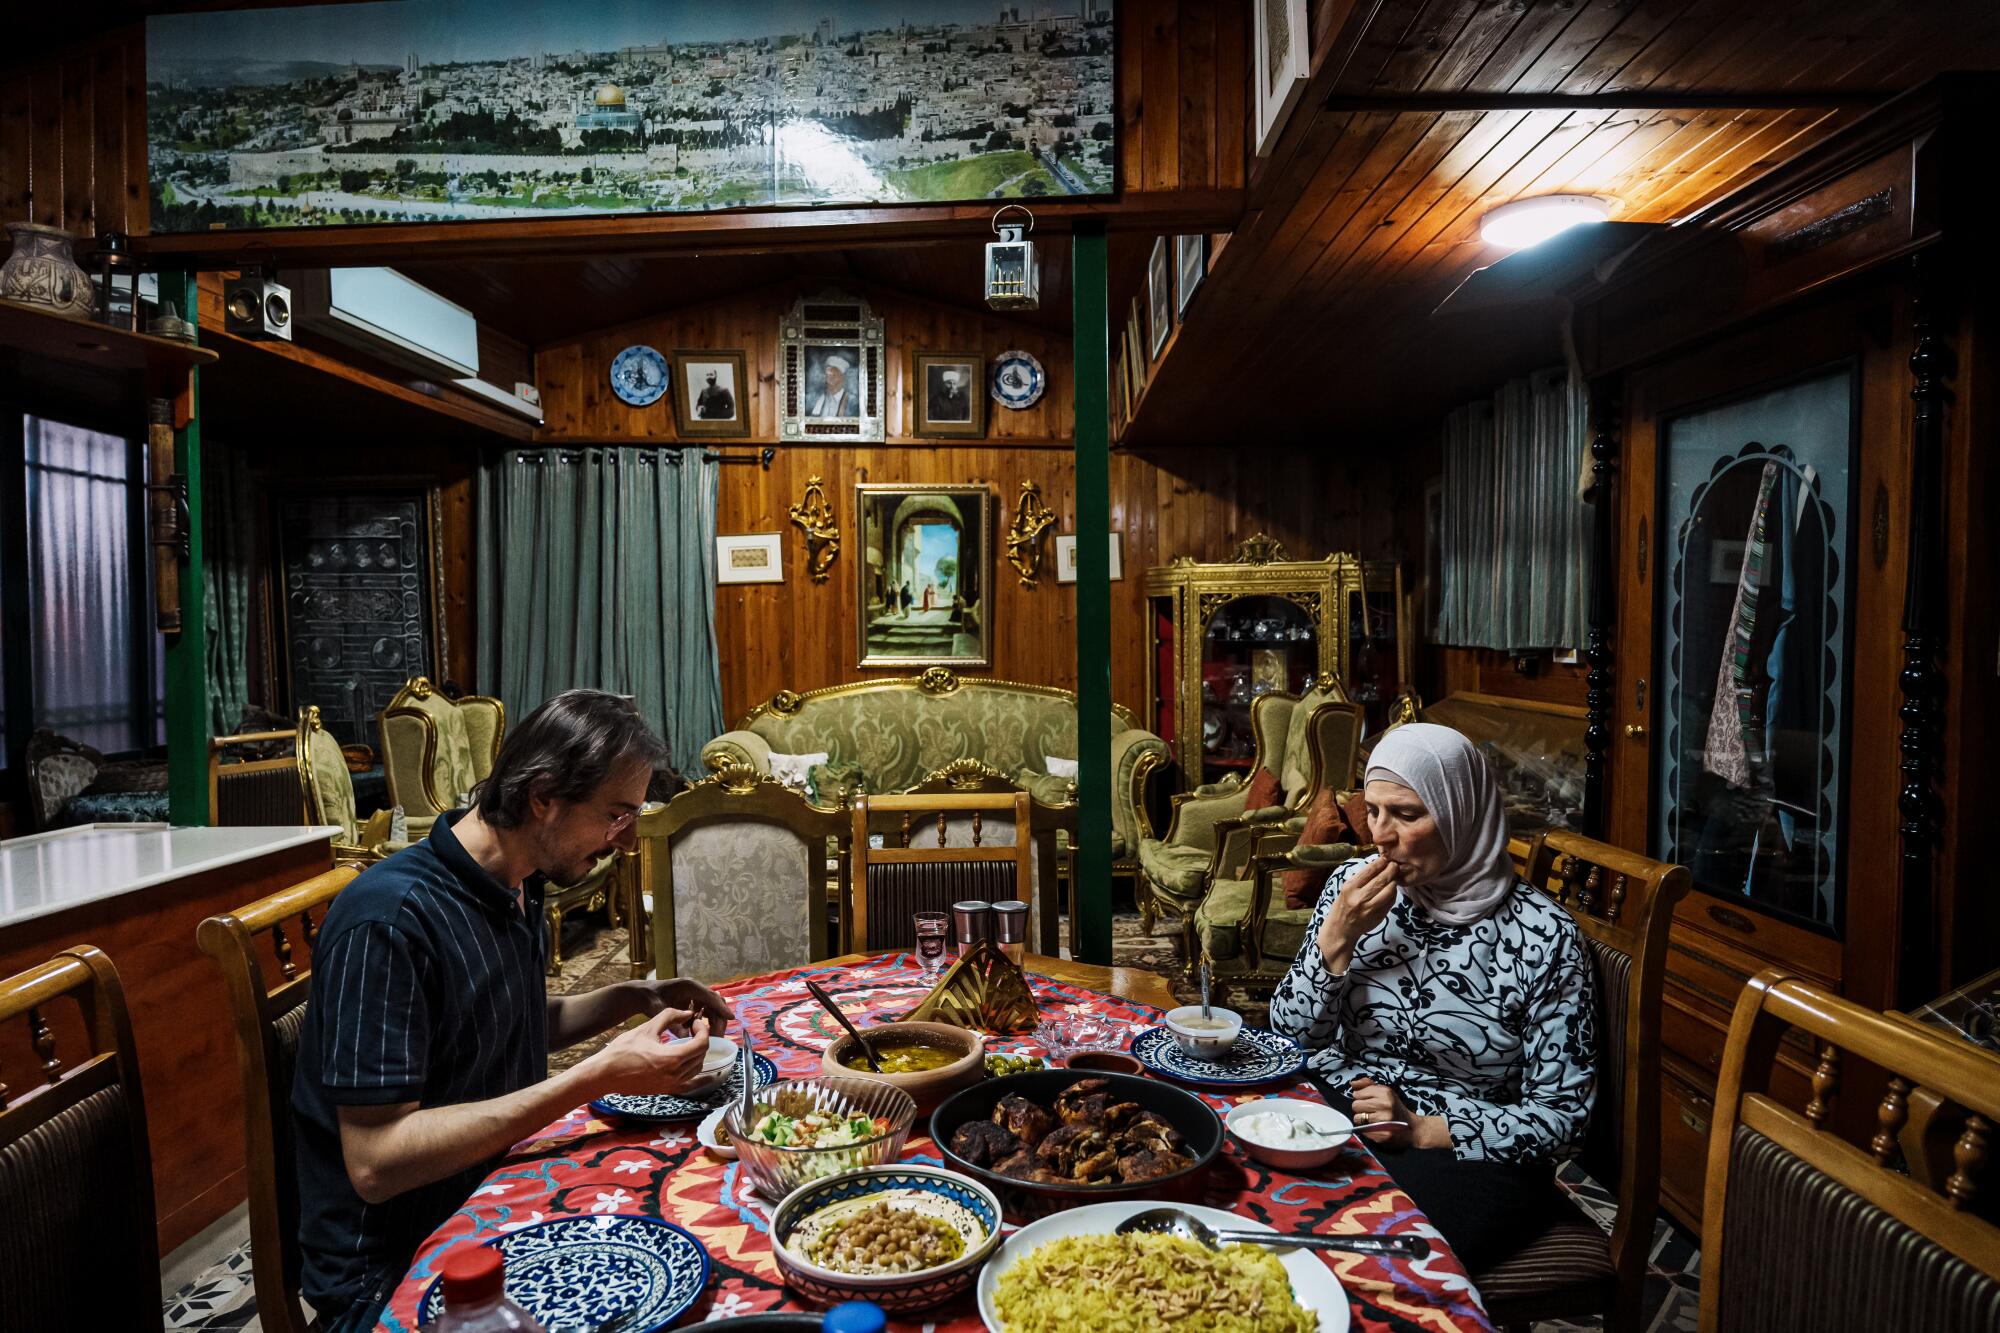 A man and older woman sit at a table in a home, eating an iftar meal.